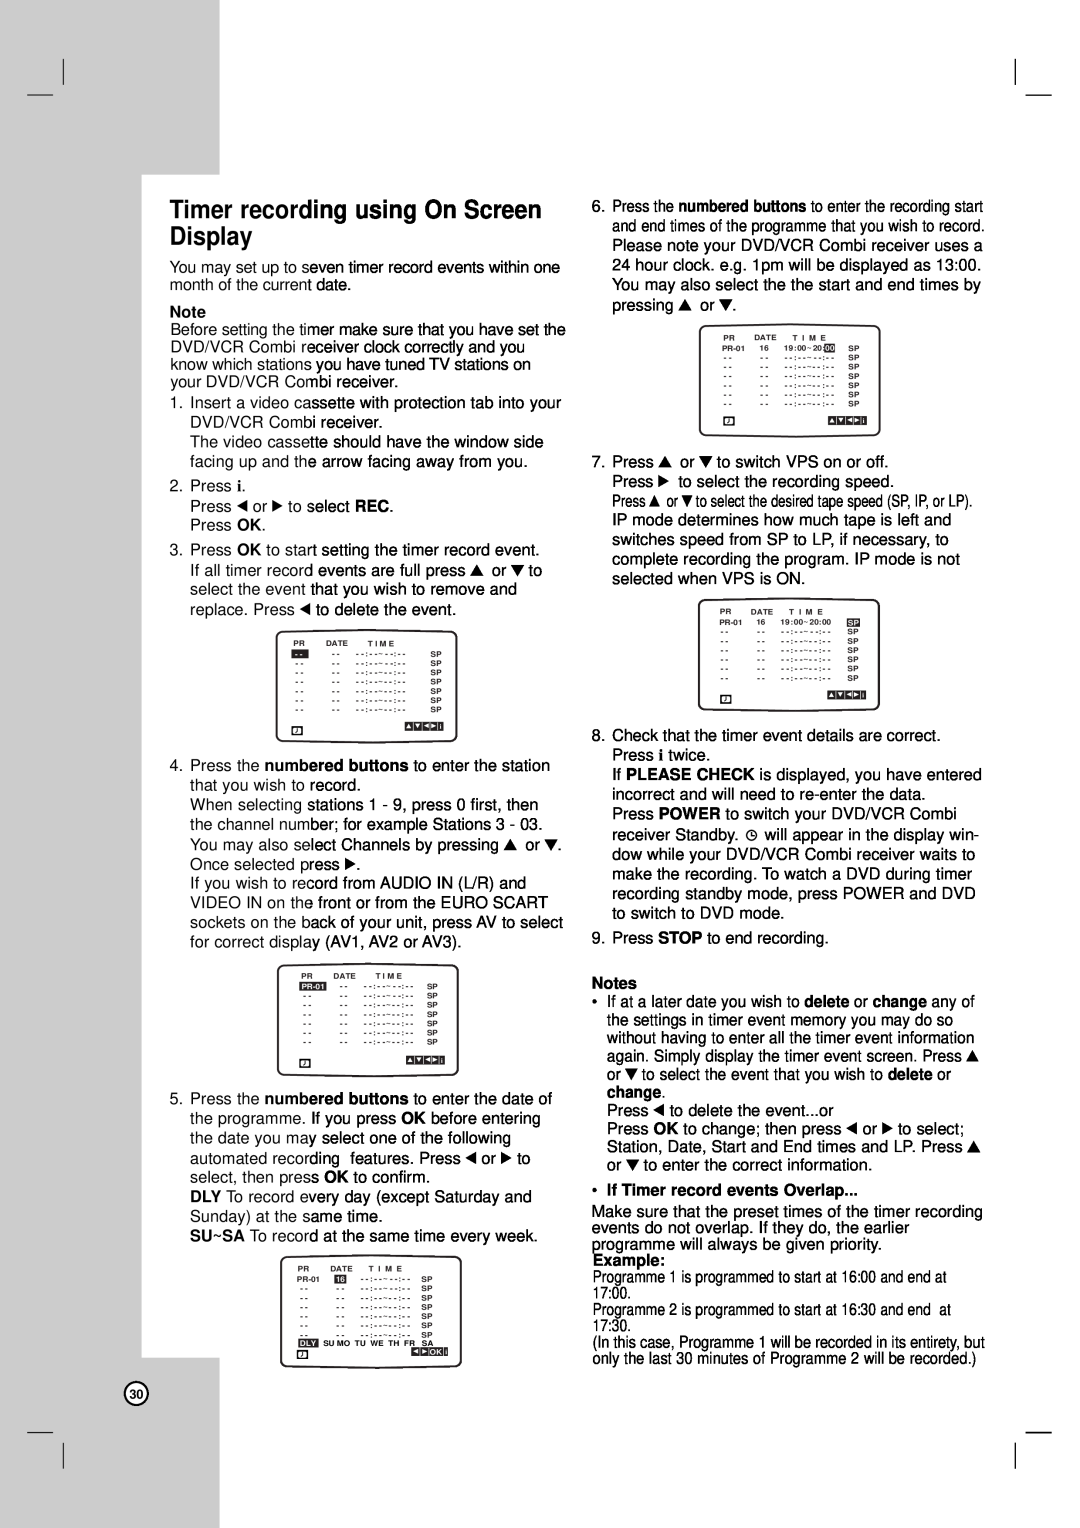 LG Electronics LH-CX245 owner manual Timer recording using On Screen Display, If Timer record events Overlap, Example 